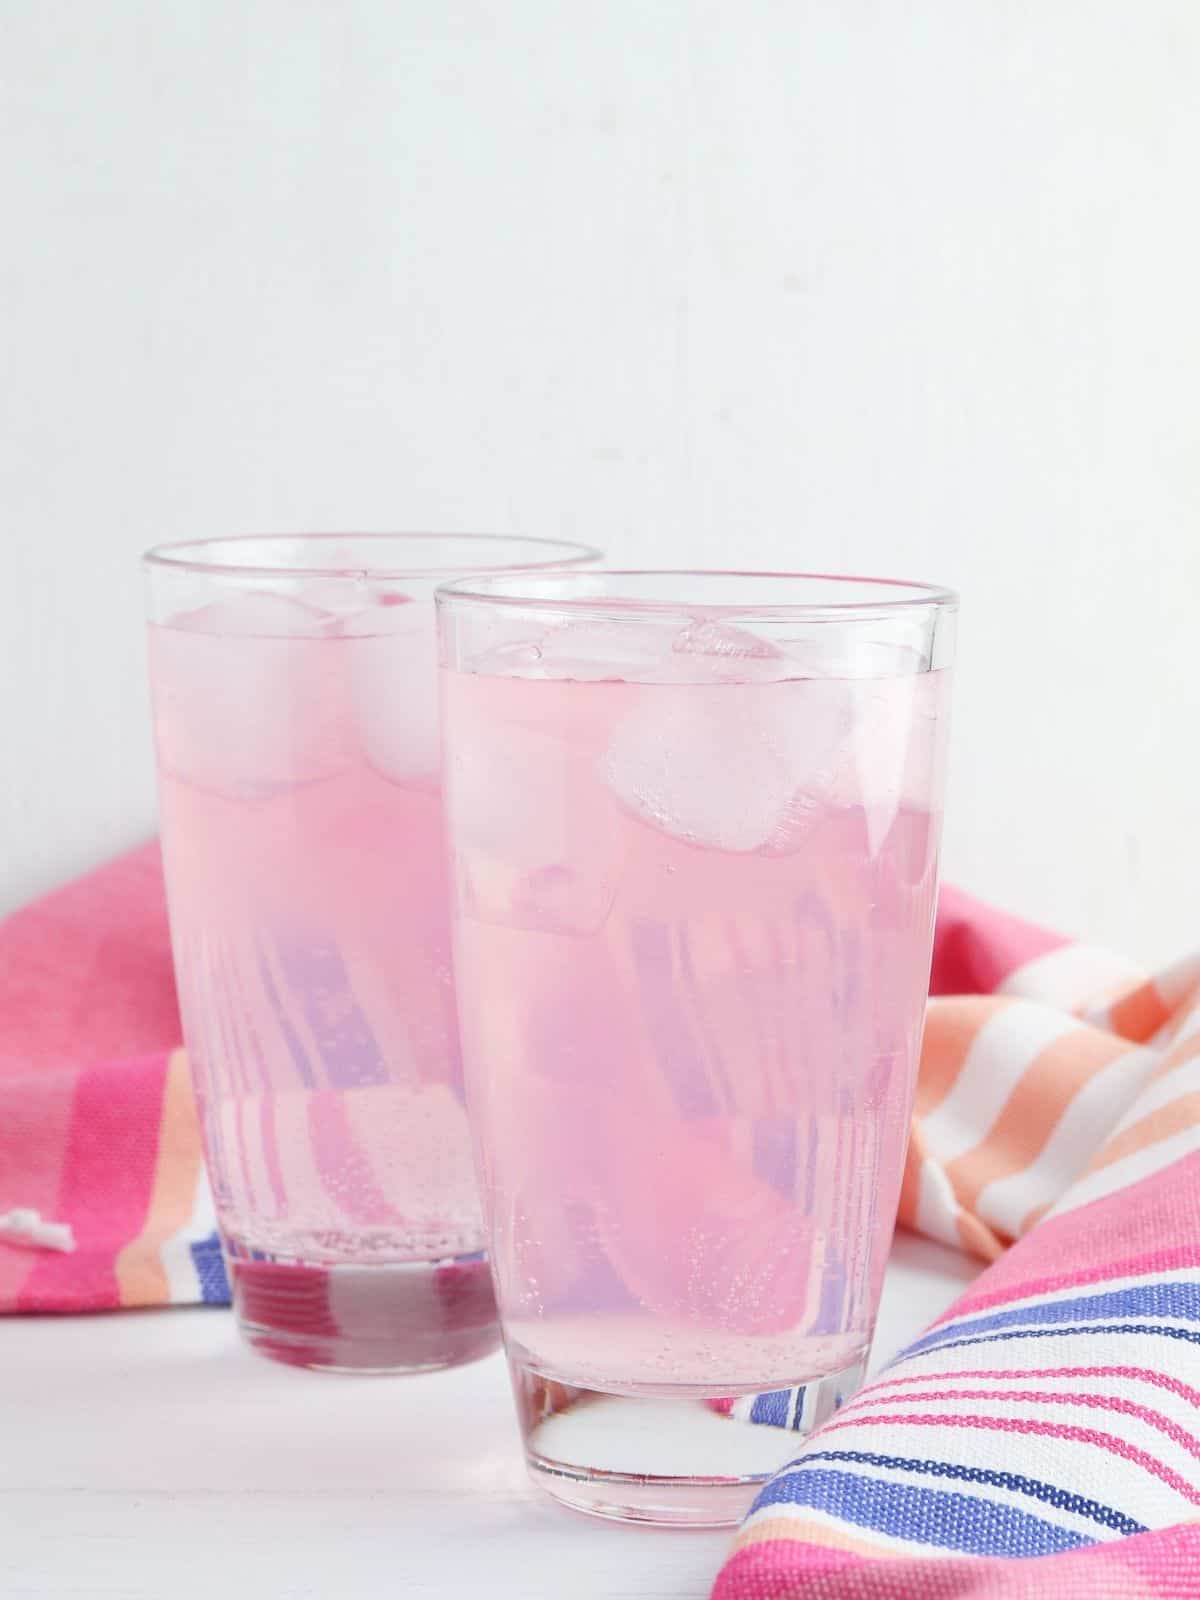 2 glasses of pink lemonade punch with striped towel.